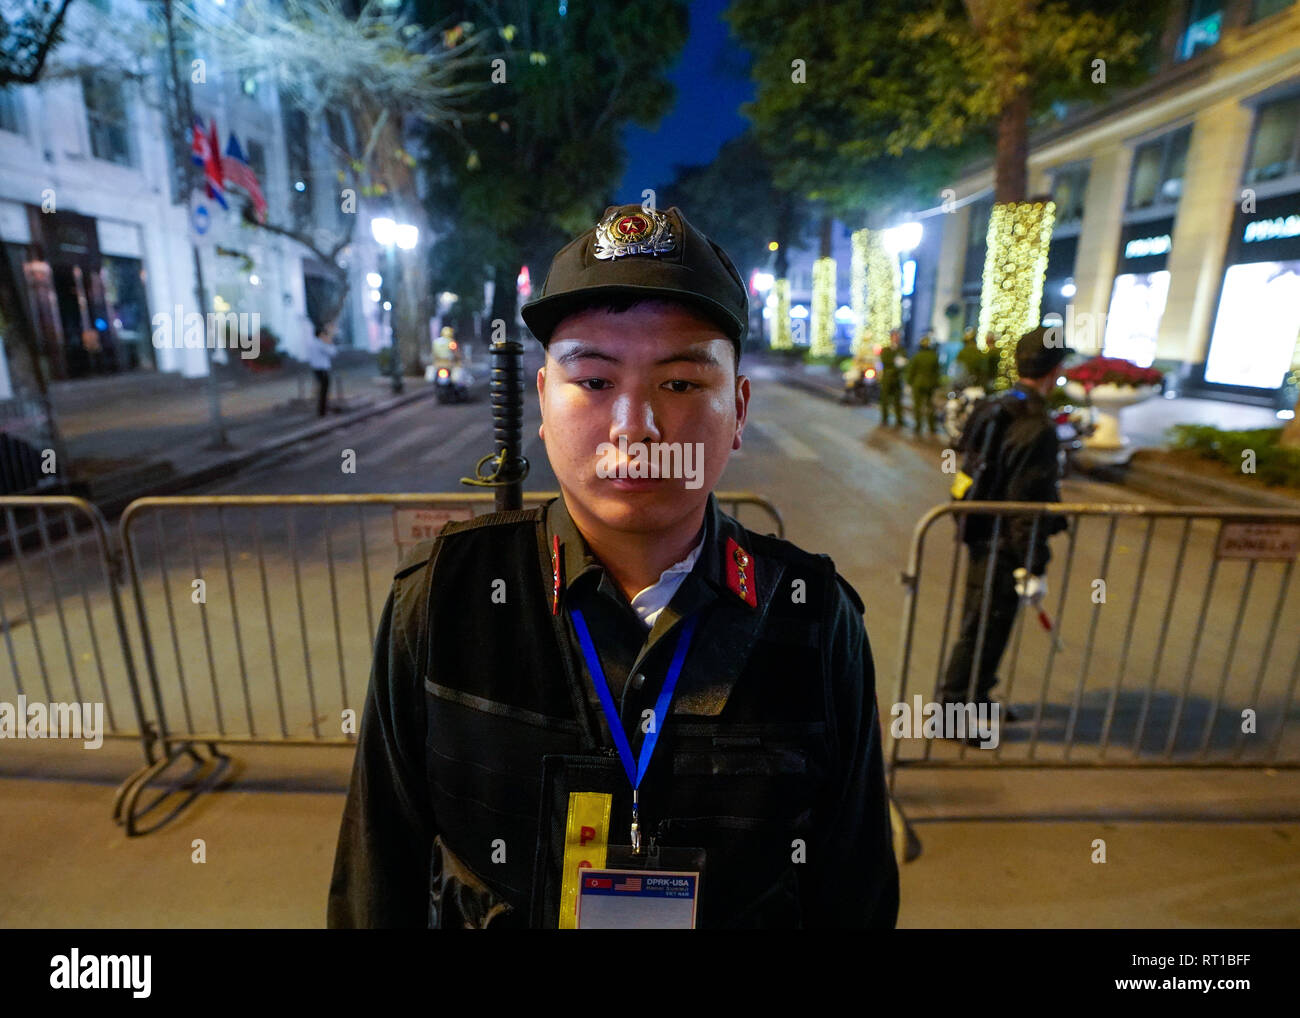 Hanoi, Vietnam. 27th Feb, 2019. February 27, 2019 - Hanoi, Vietnam - A security personnel stands guard to the street leading to the Sofitel Legend Metropole hotel where North Korean Leader Kim Jong Un and U.S. President Donald Trump will meet for dinner during the second North Korea-U.S. Summit in the capital city of Hanoi, Vietnam. Credit: Christopher Jue/ZUMA Wire/Alamy Live News Stock Photo